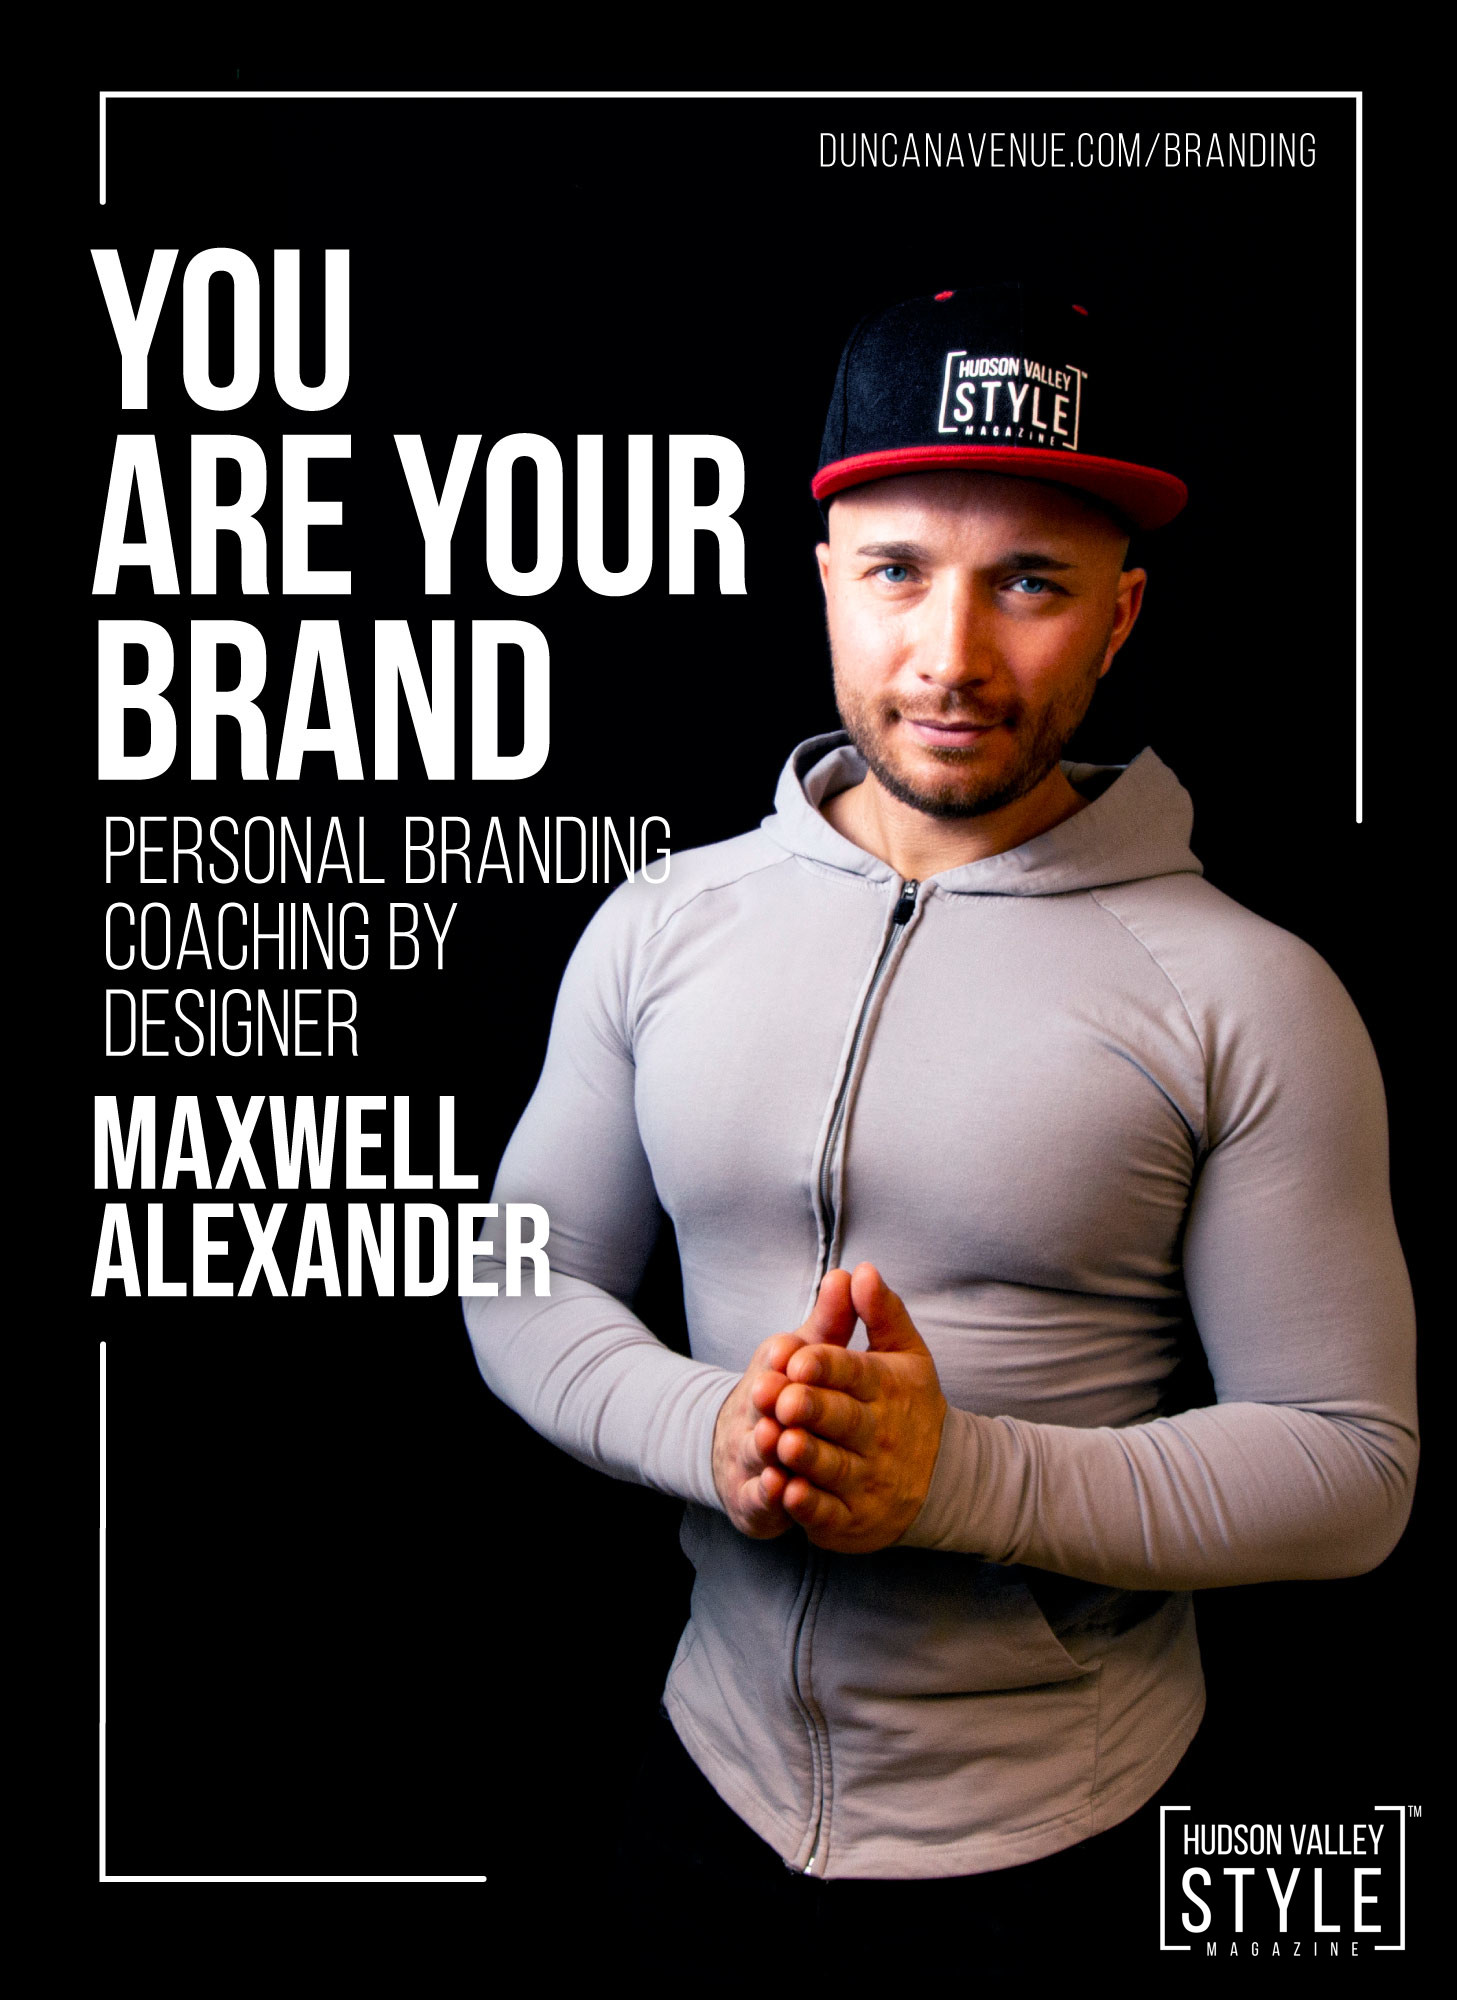 You Are Your Brand – Personal Branding Coaching by Designer Maxwell Alexander